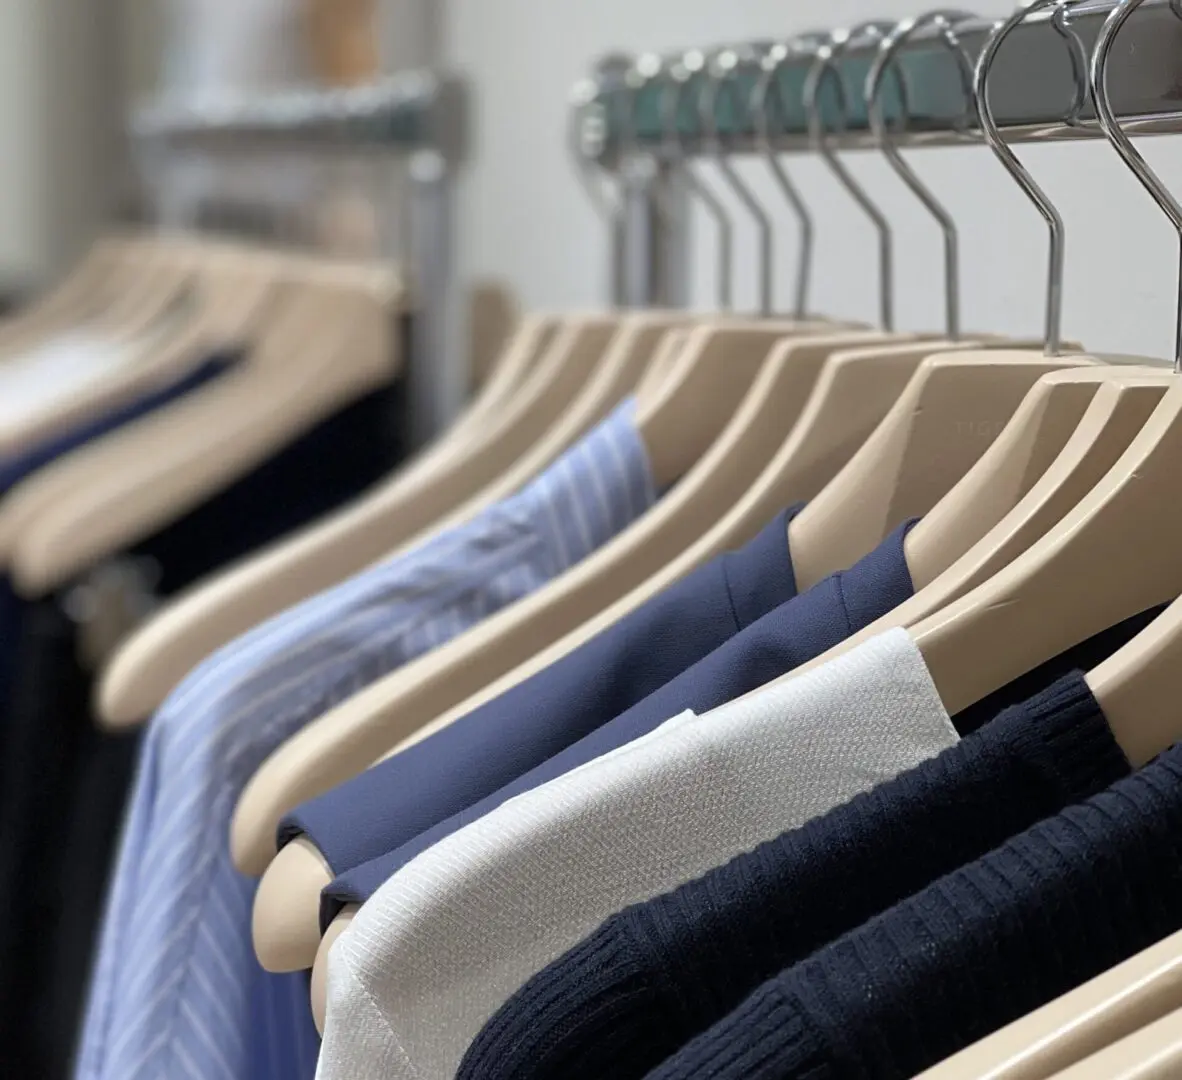 A rack of clothes with wooden clothes hangers